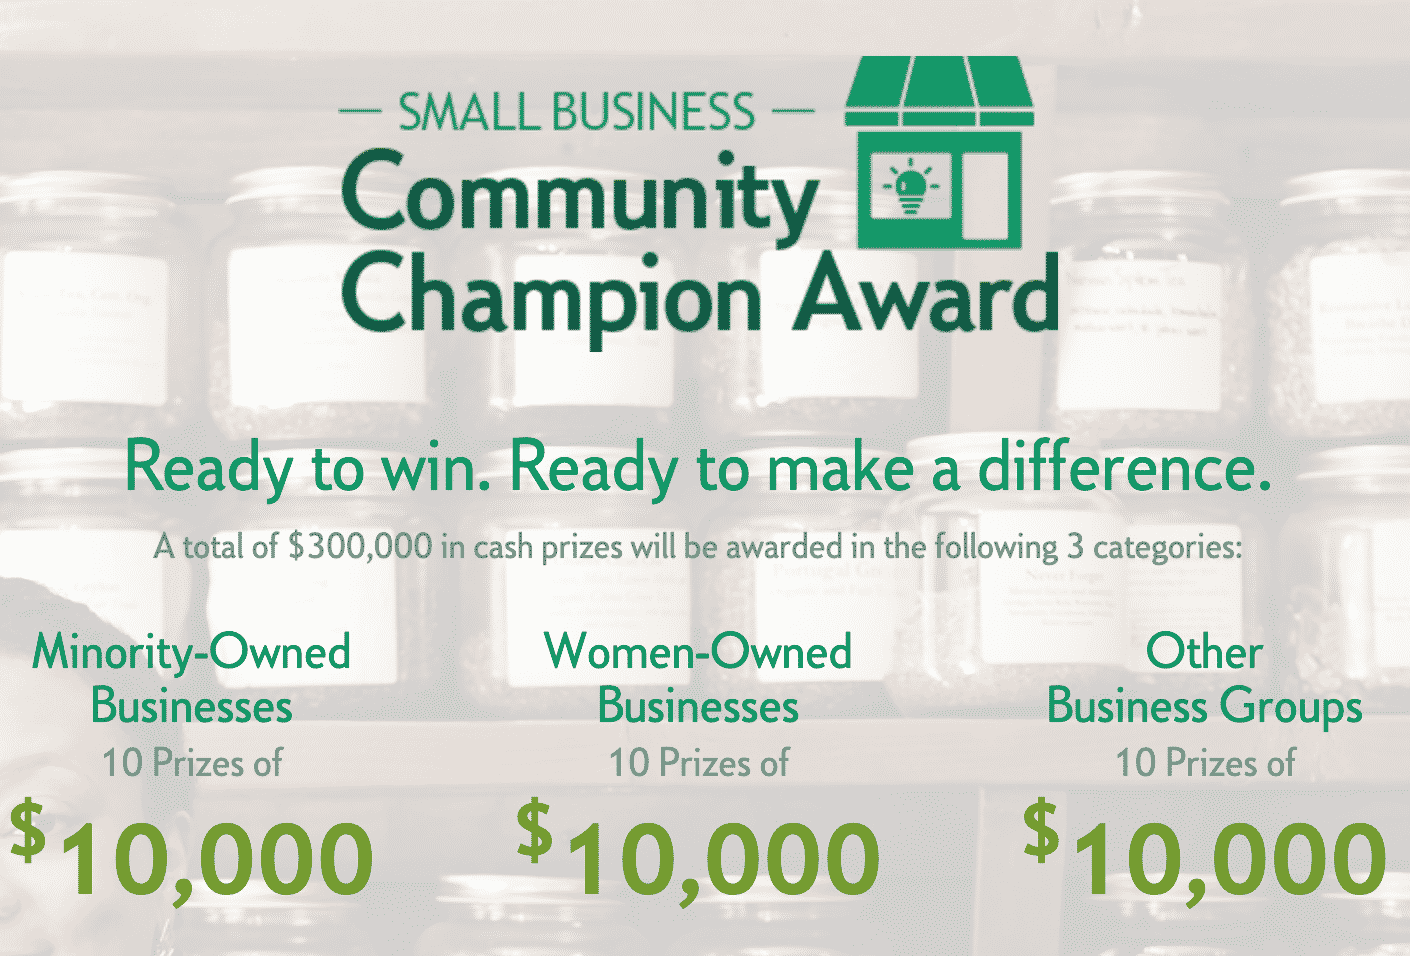 [Citizens Bank] Nominations for the Small Business Community Champion Award Contest are open until March 1.